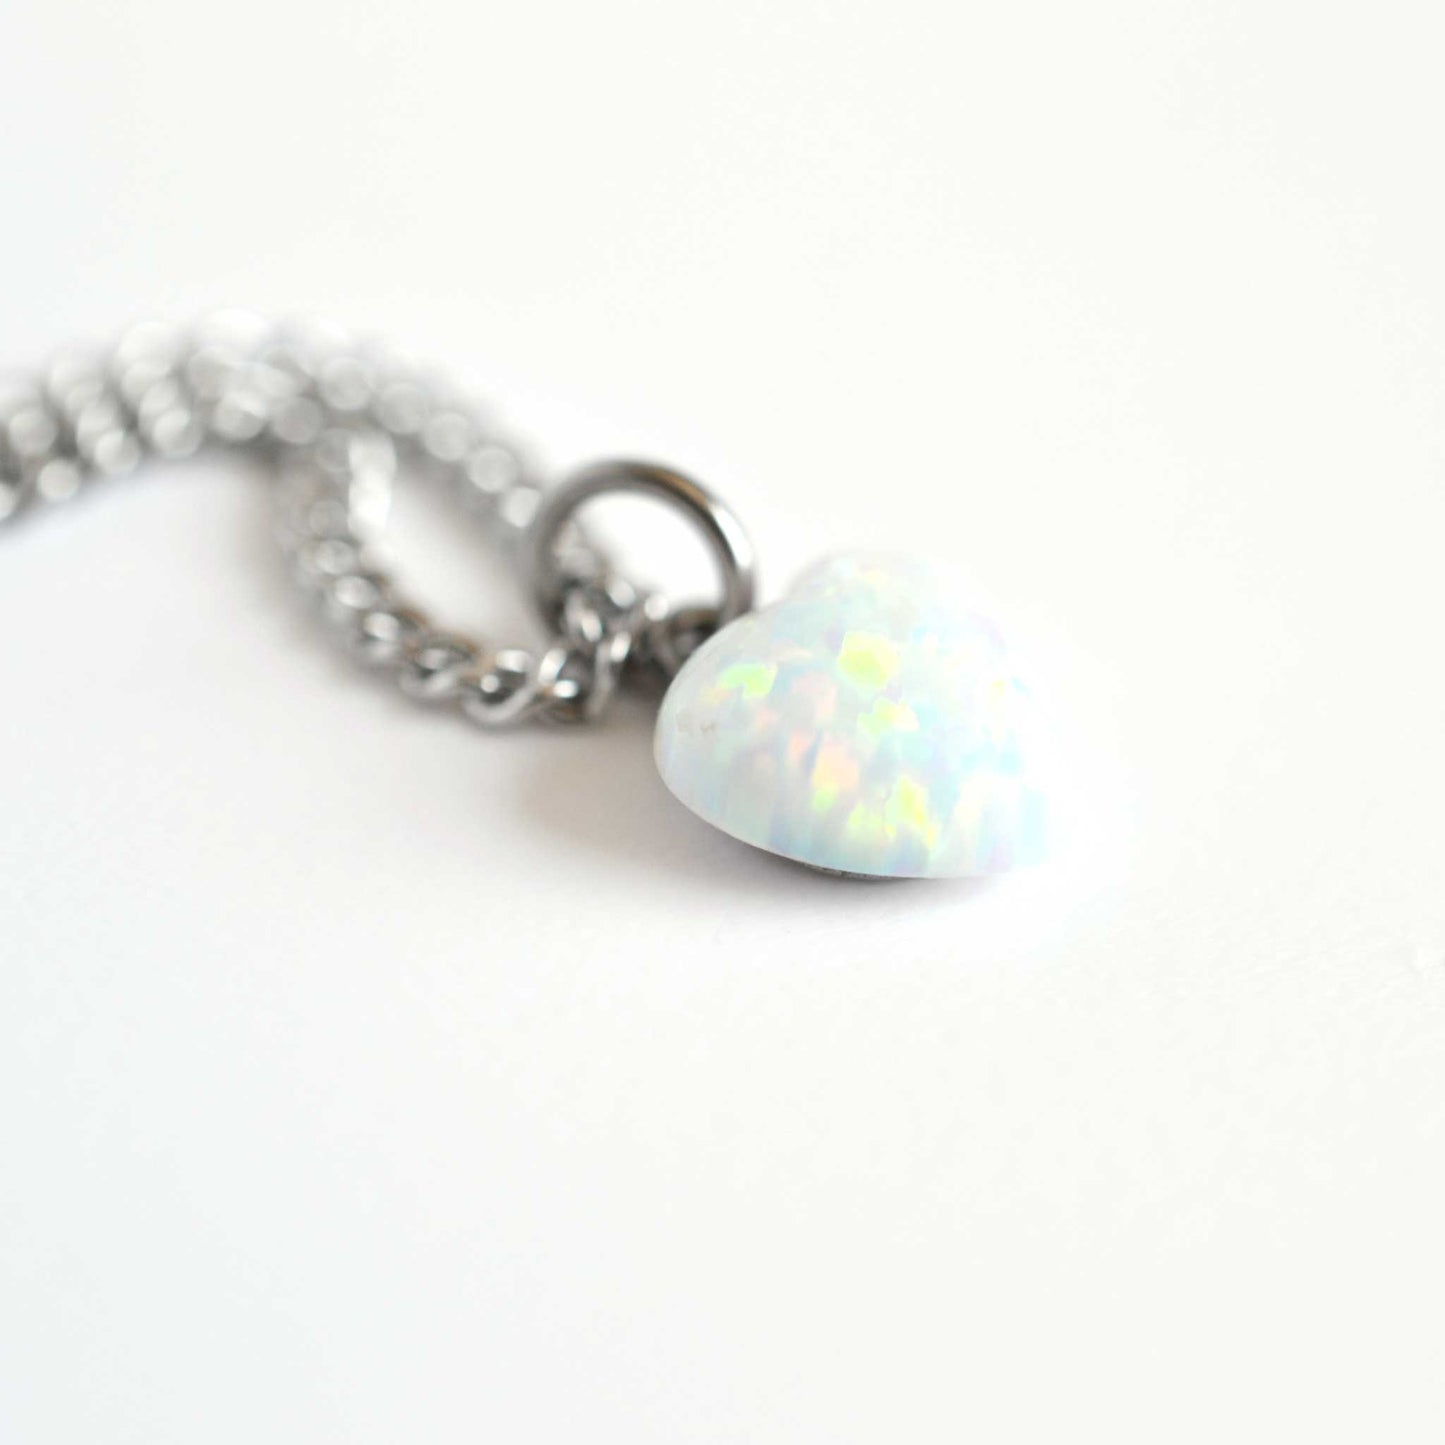 Side close up view of lab created white Opal heart pendant